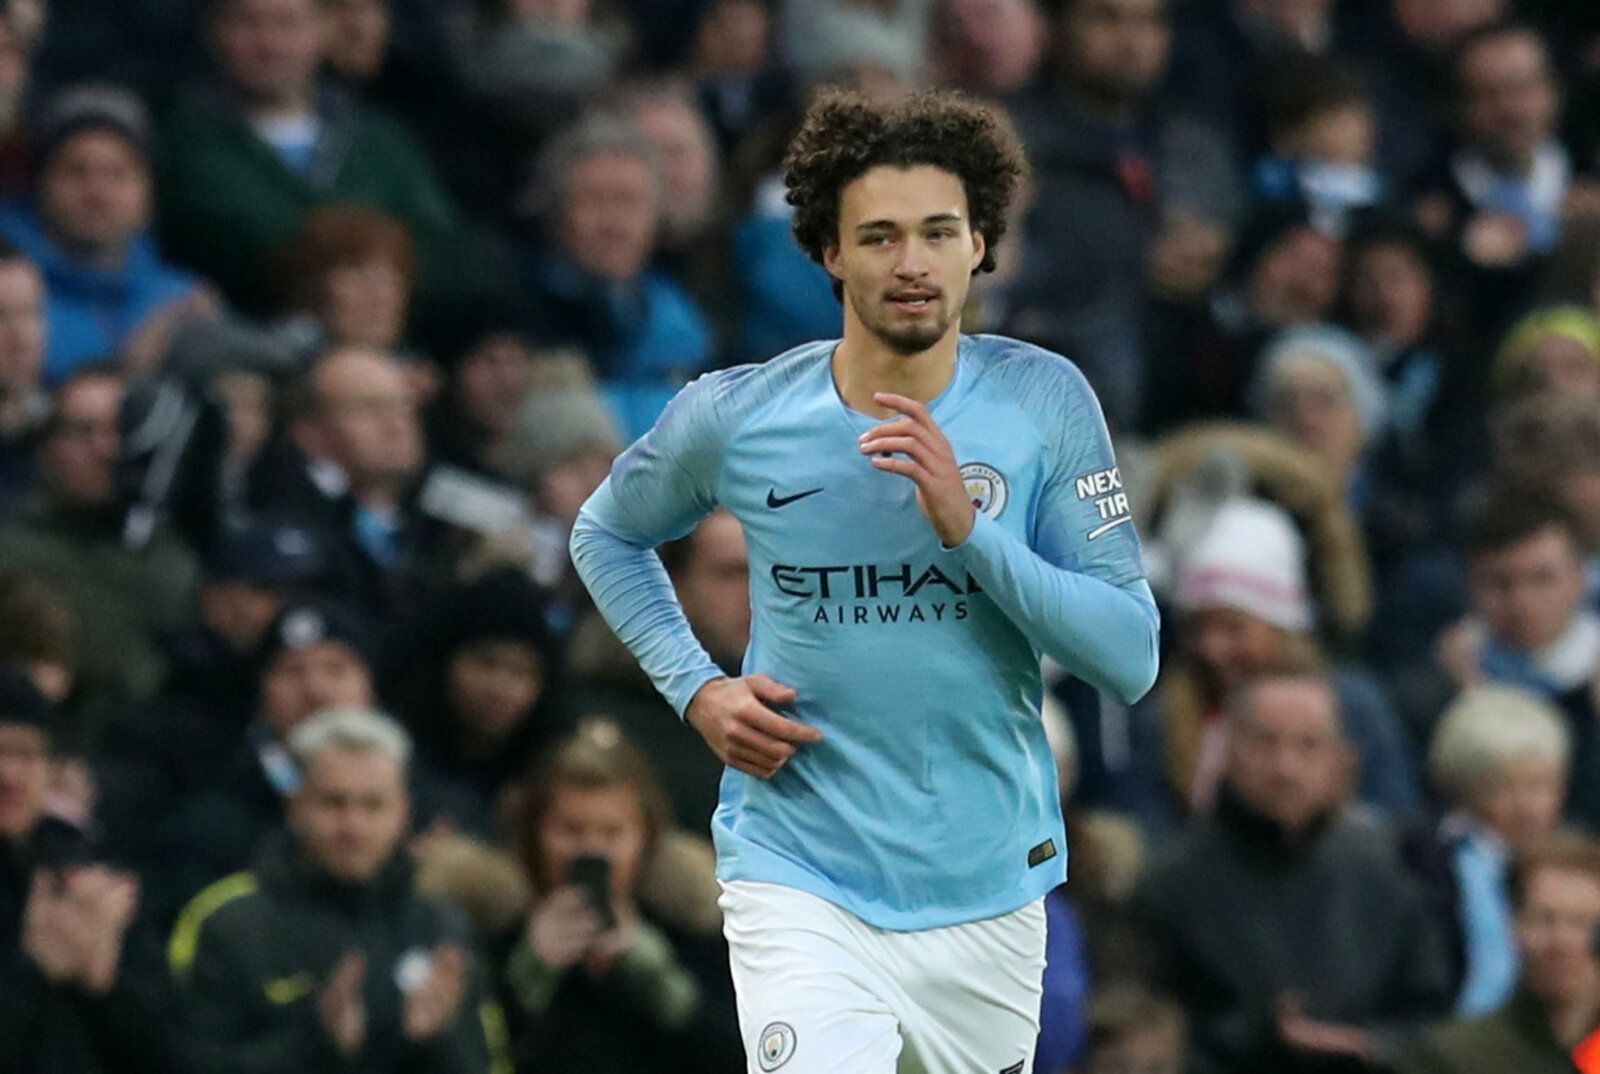 Soccer Football - FA Cup Third Round - Manchester City v Rotherham United - Etihad Stadium, Manchester, Britain - January 6, 2019  Manchester City's Philippe Sandler comes on as a substitute to replace Kevin De Bruyne (not pictured)   REUTERS/Jon Super